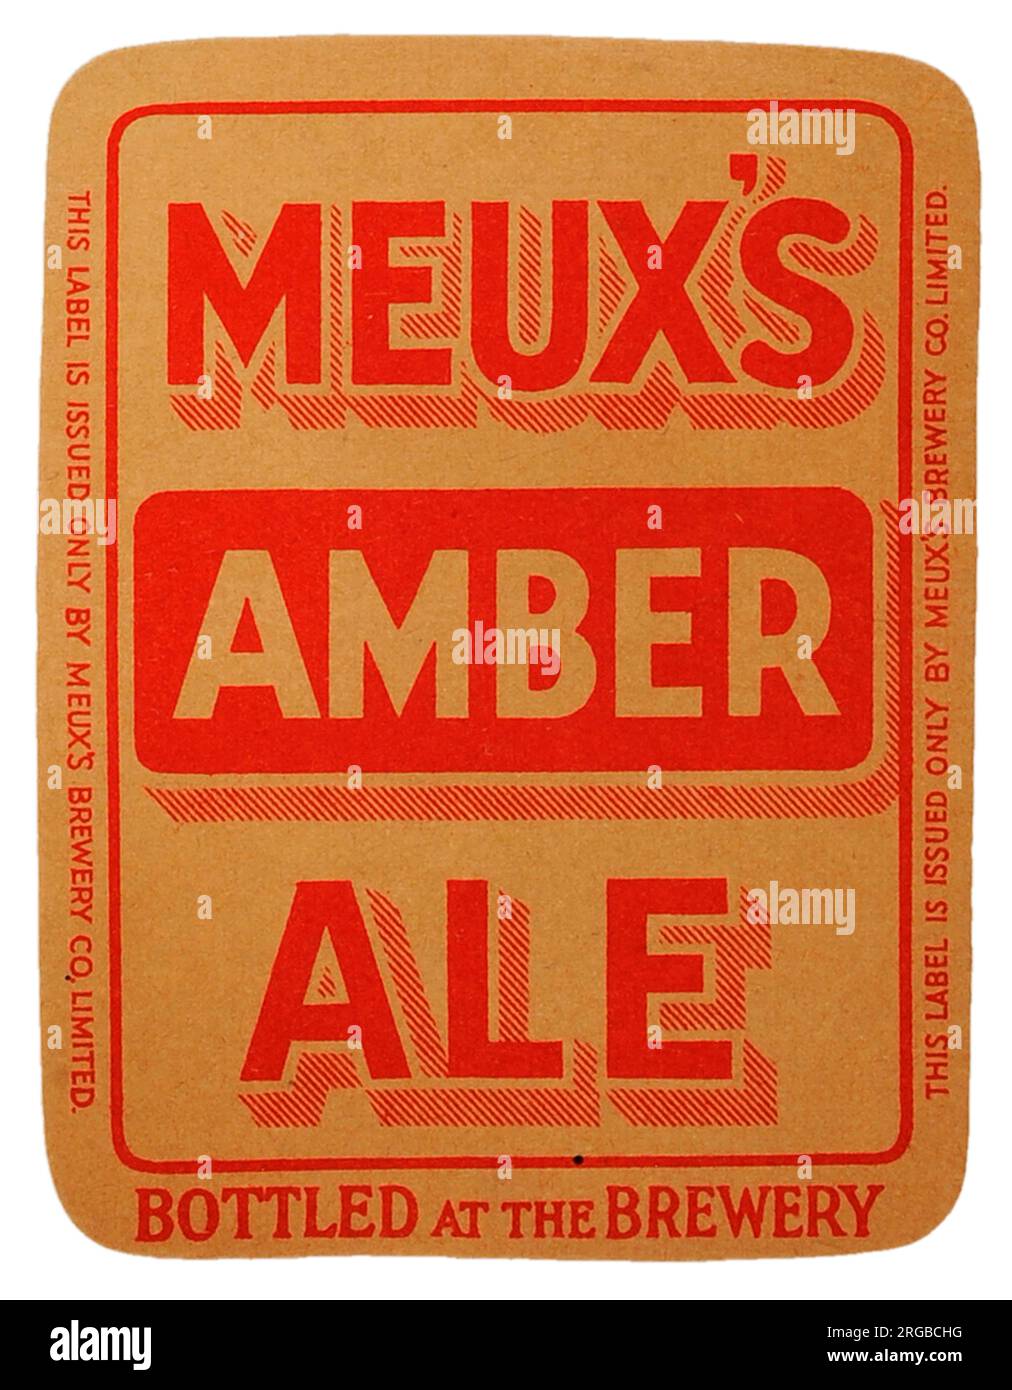 Meux's Amber Ale Stock Photo